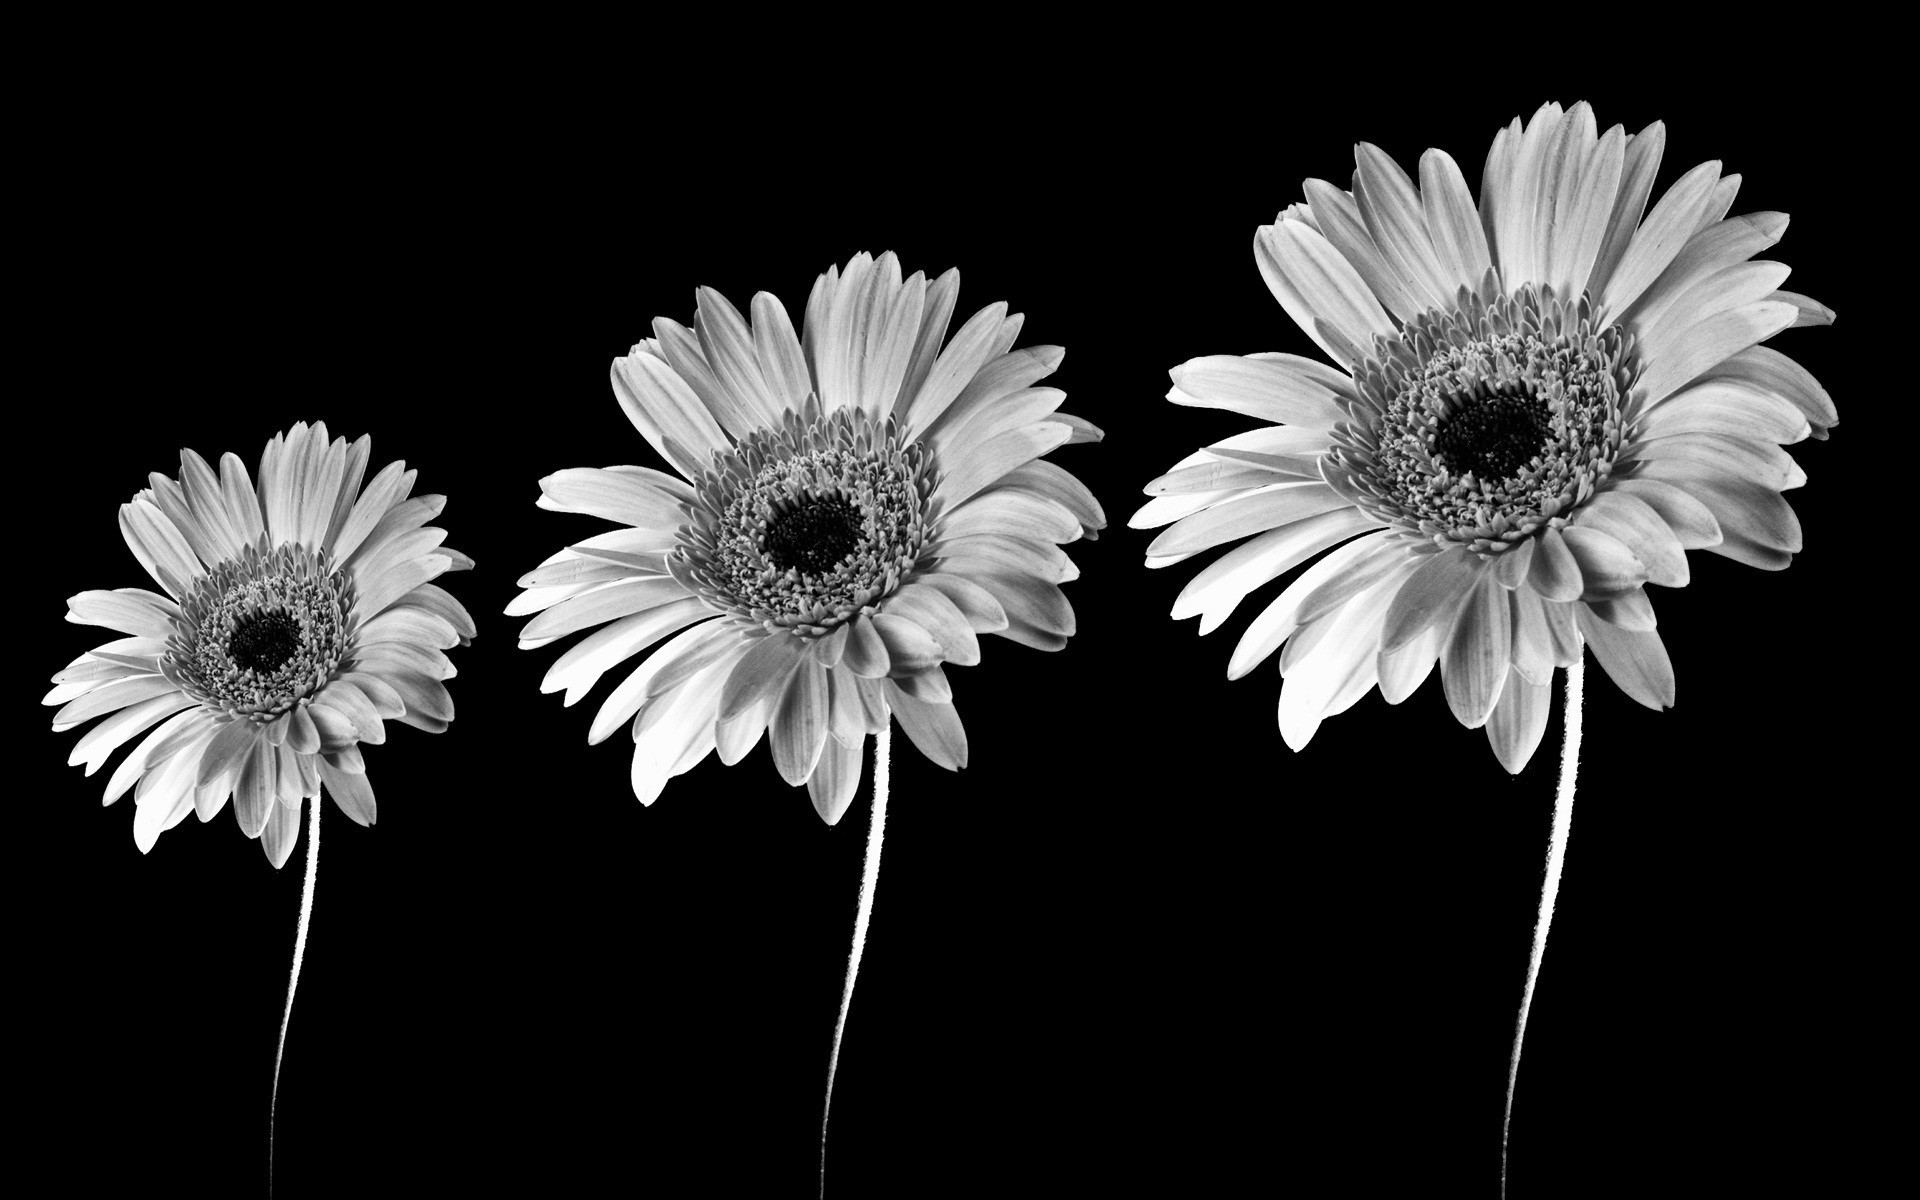 Black And White Images Of Flowers 9 Background